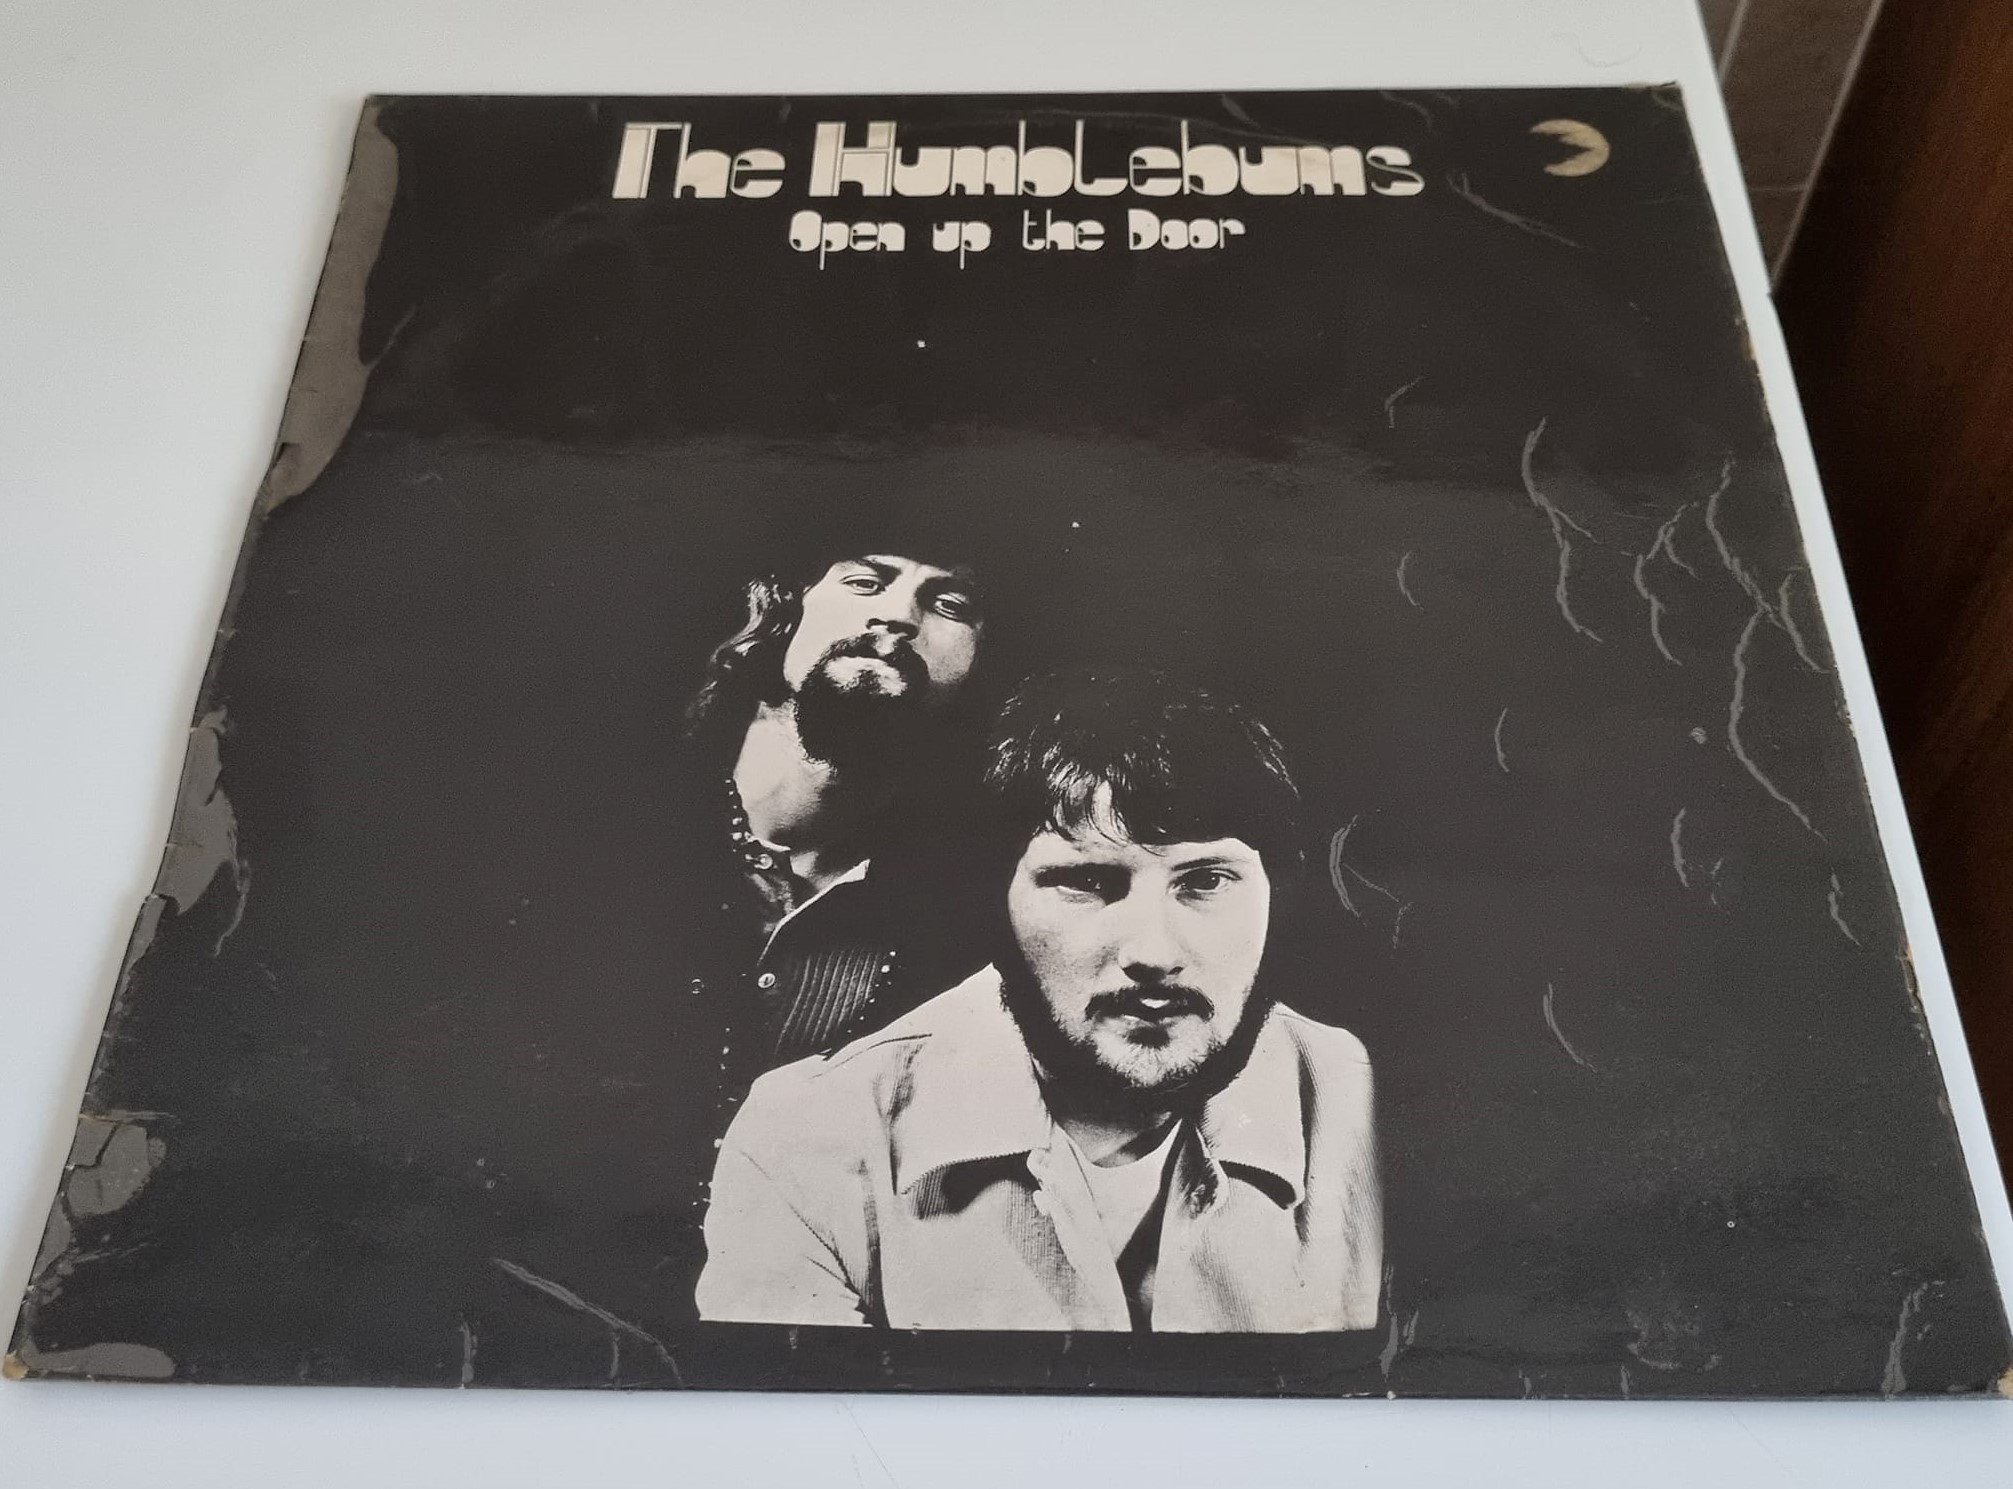 Buy this rare Humblebums record by clicking here